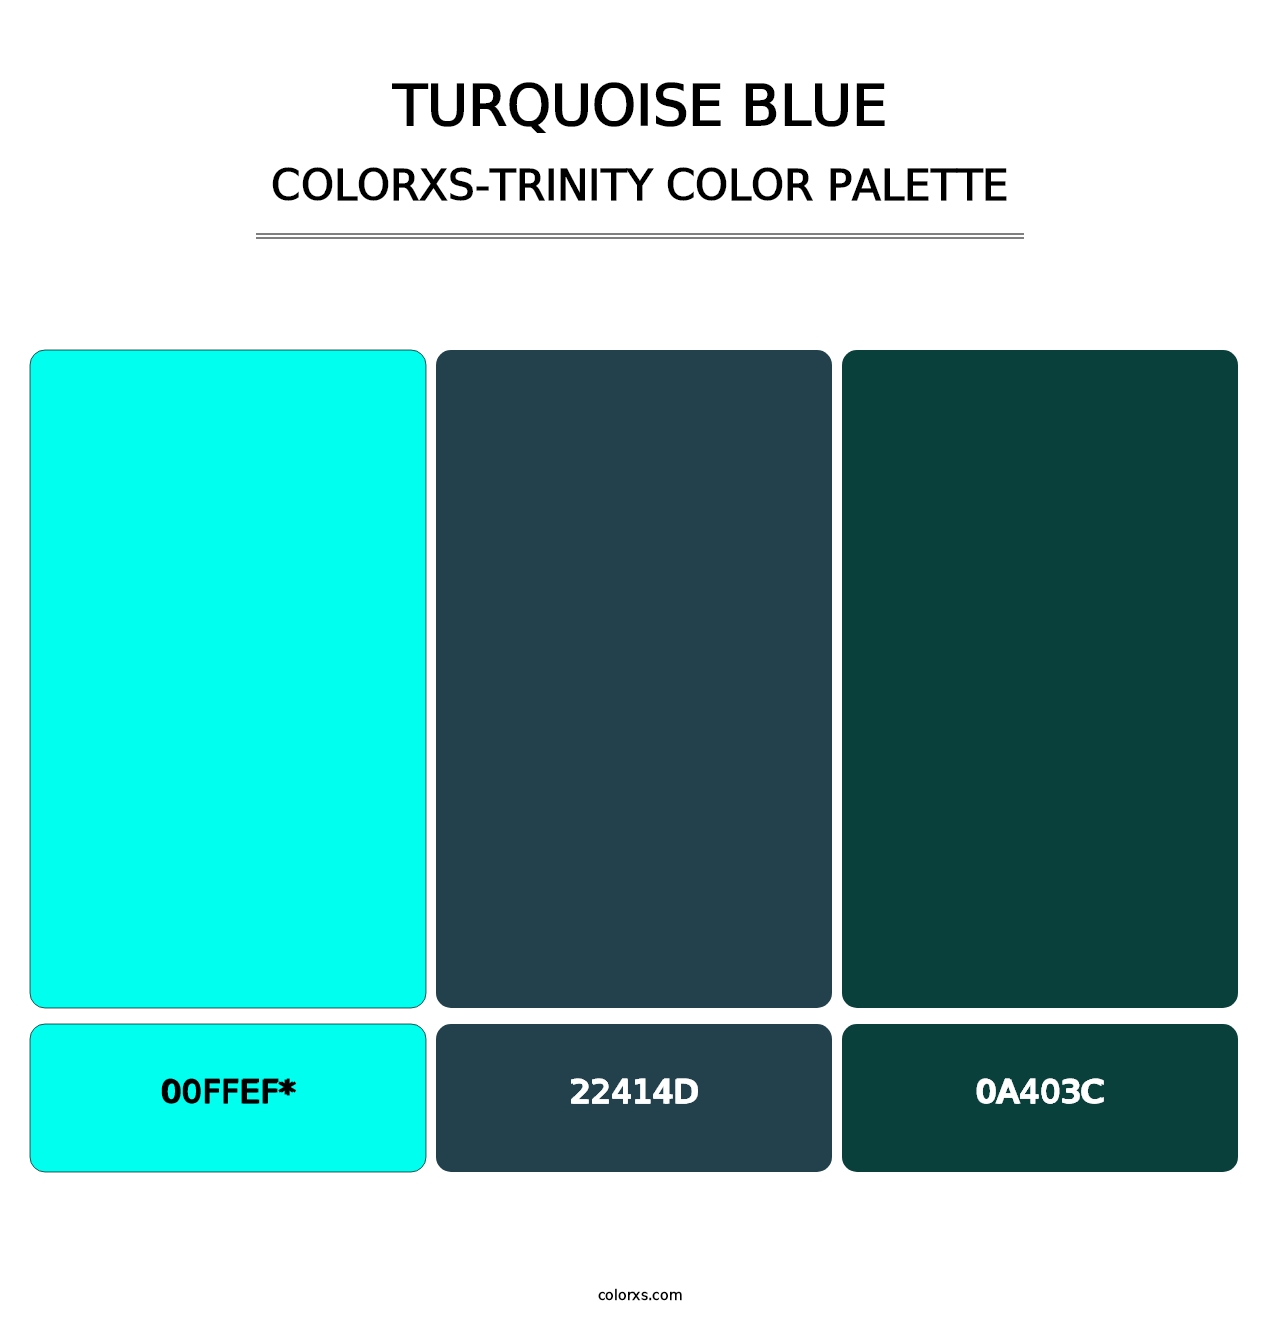 Turquoise Blue - Colorxs Trinity Palette